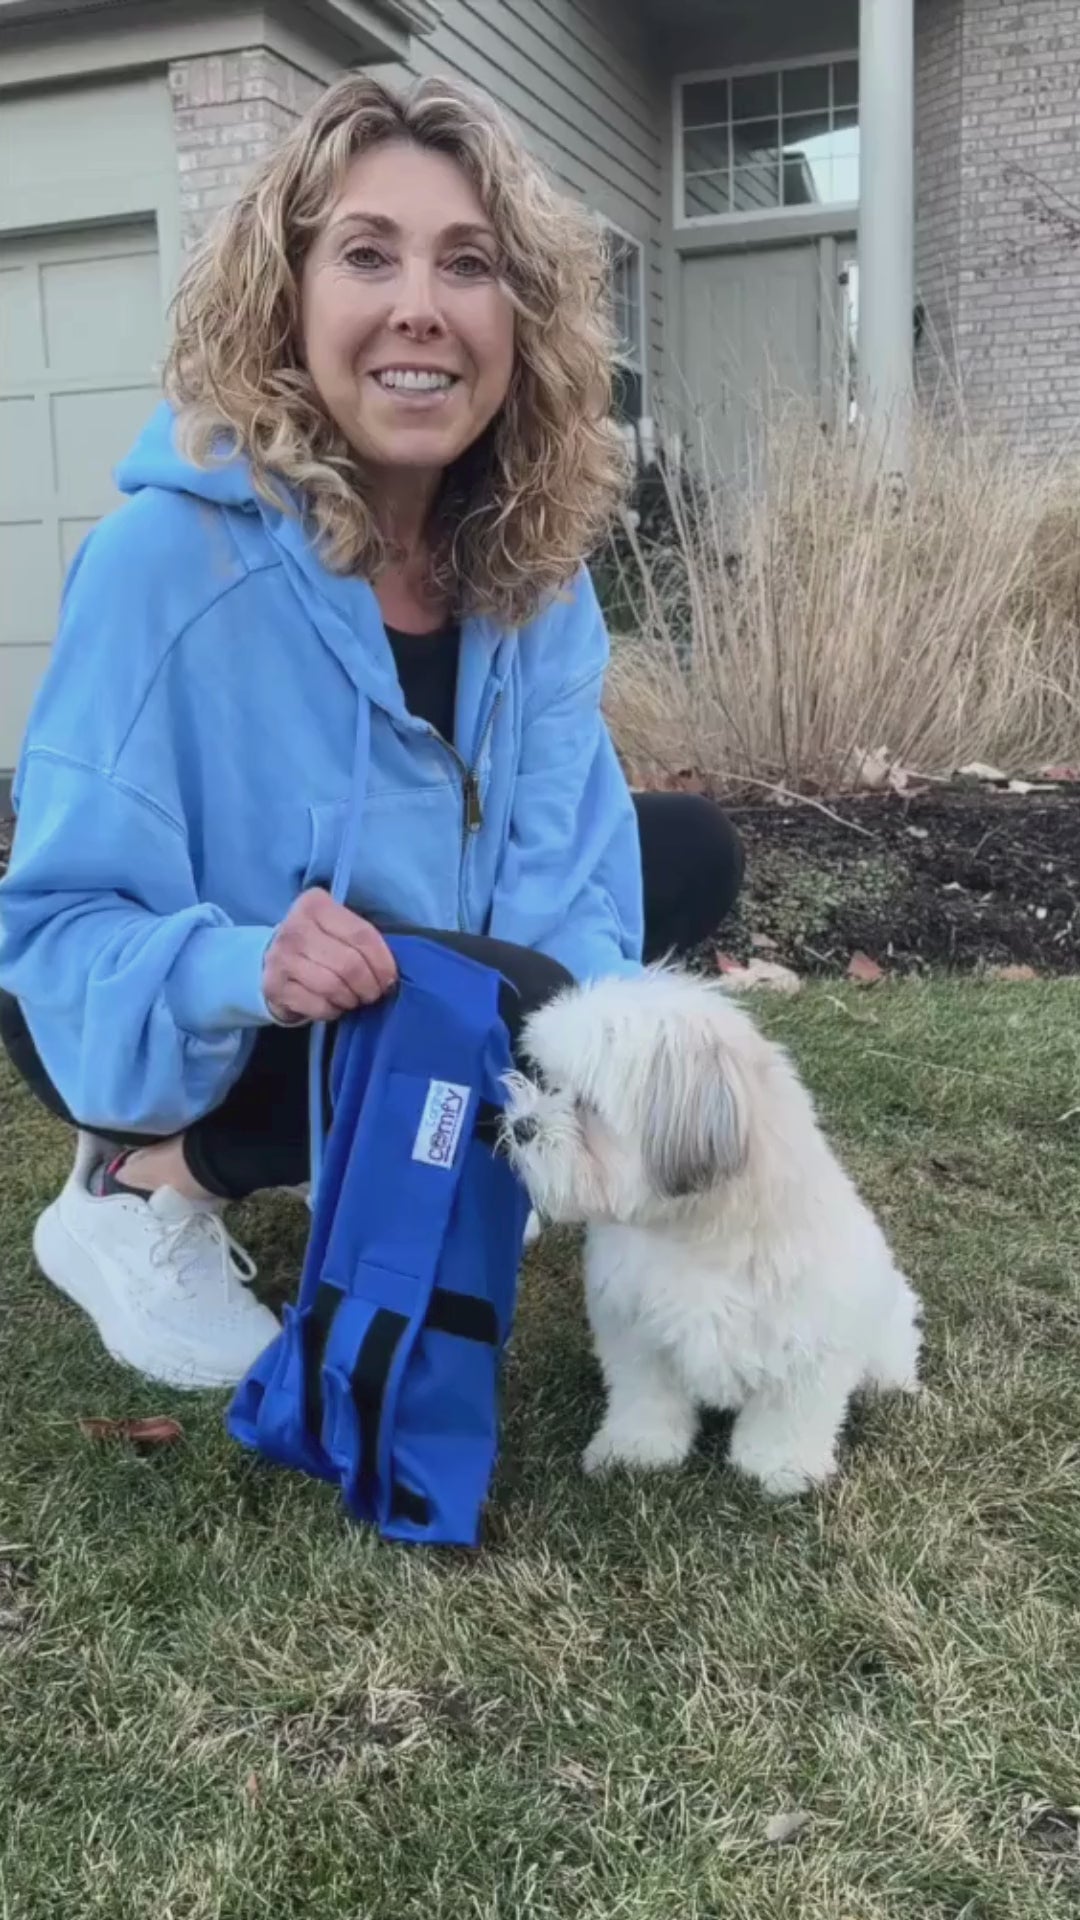 Video of how to put the Canine Comfy Dog Suit on a dog